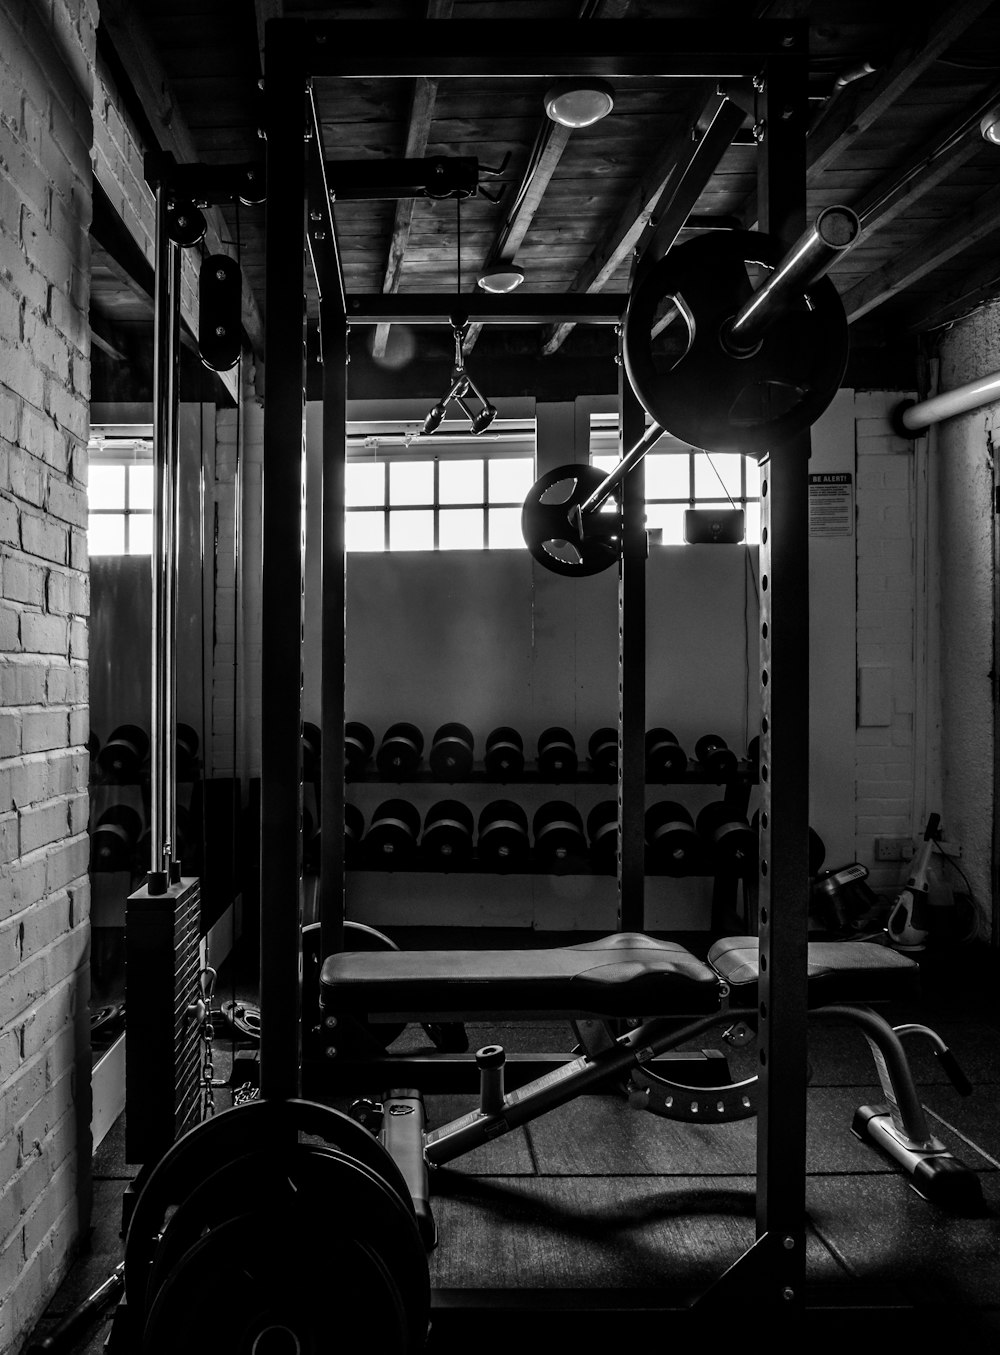 exercise equipments in grayscale photography